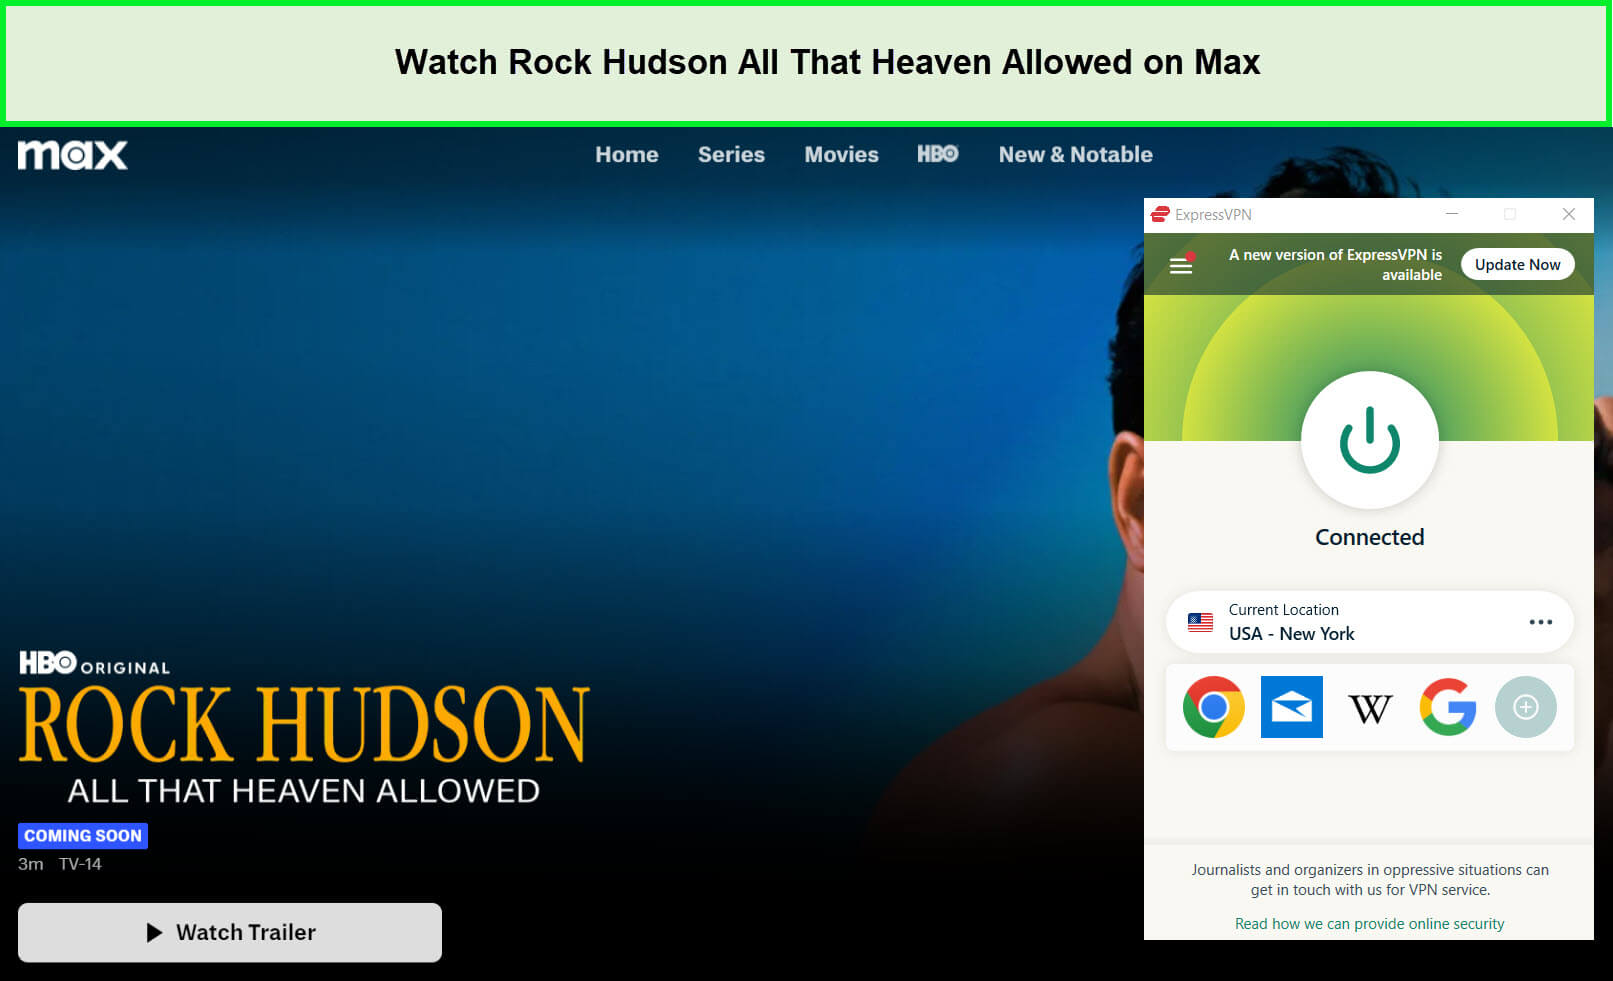 Watch-Rock-Hudson-All-That-Heaven-Allowed-in-UK-on-Max